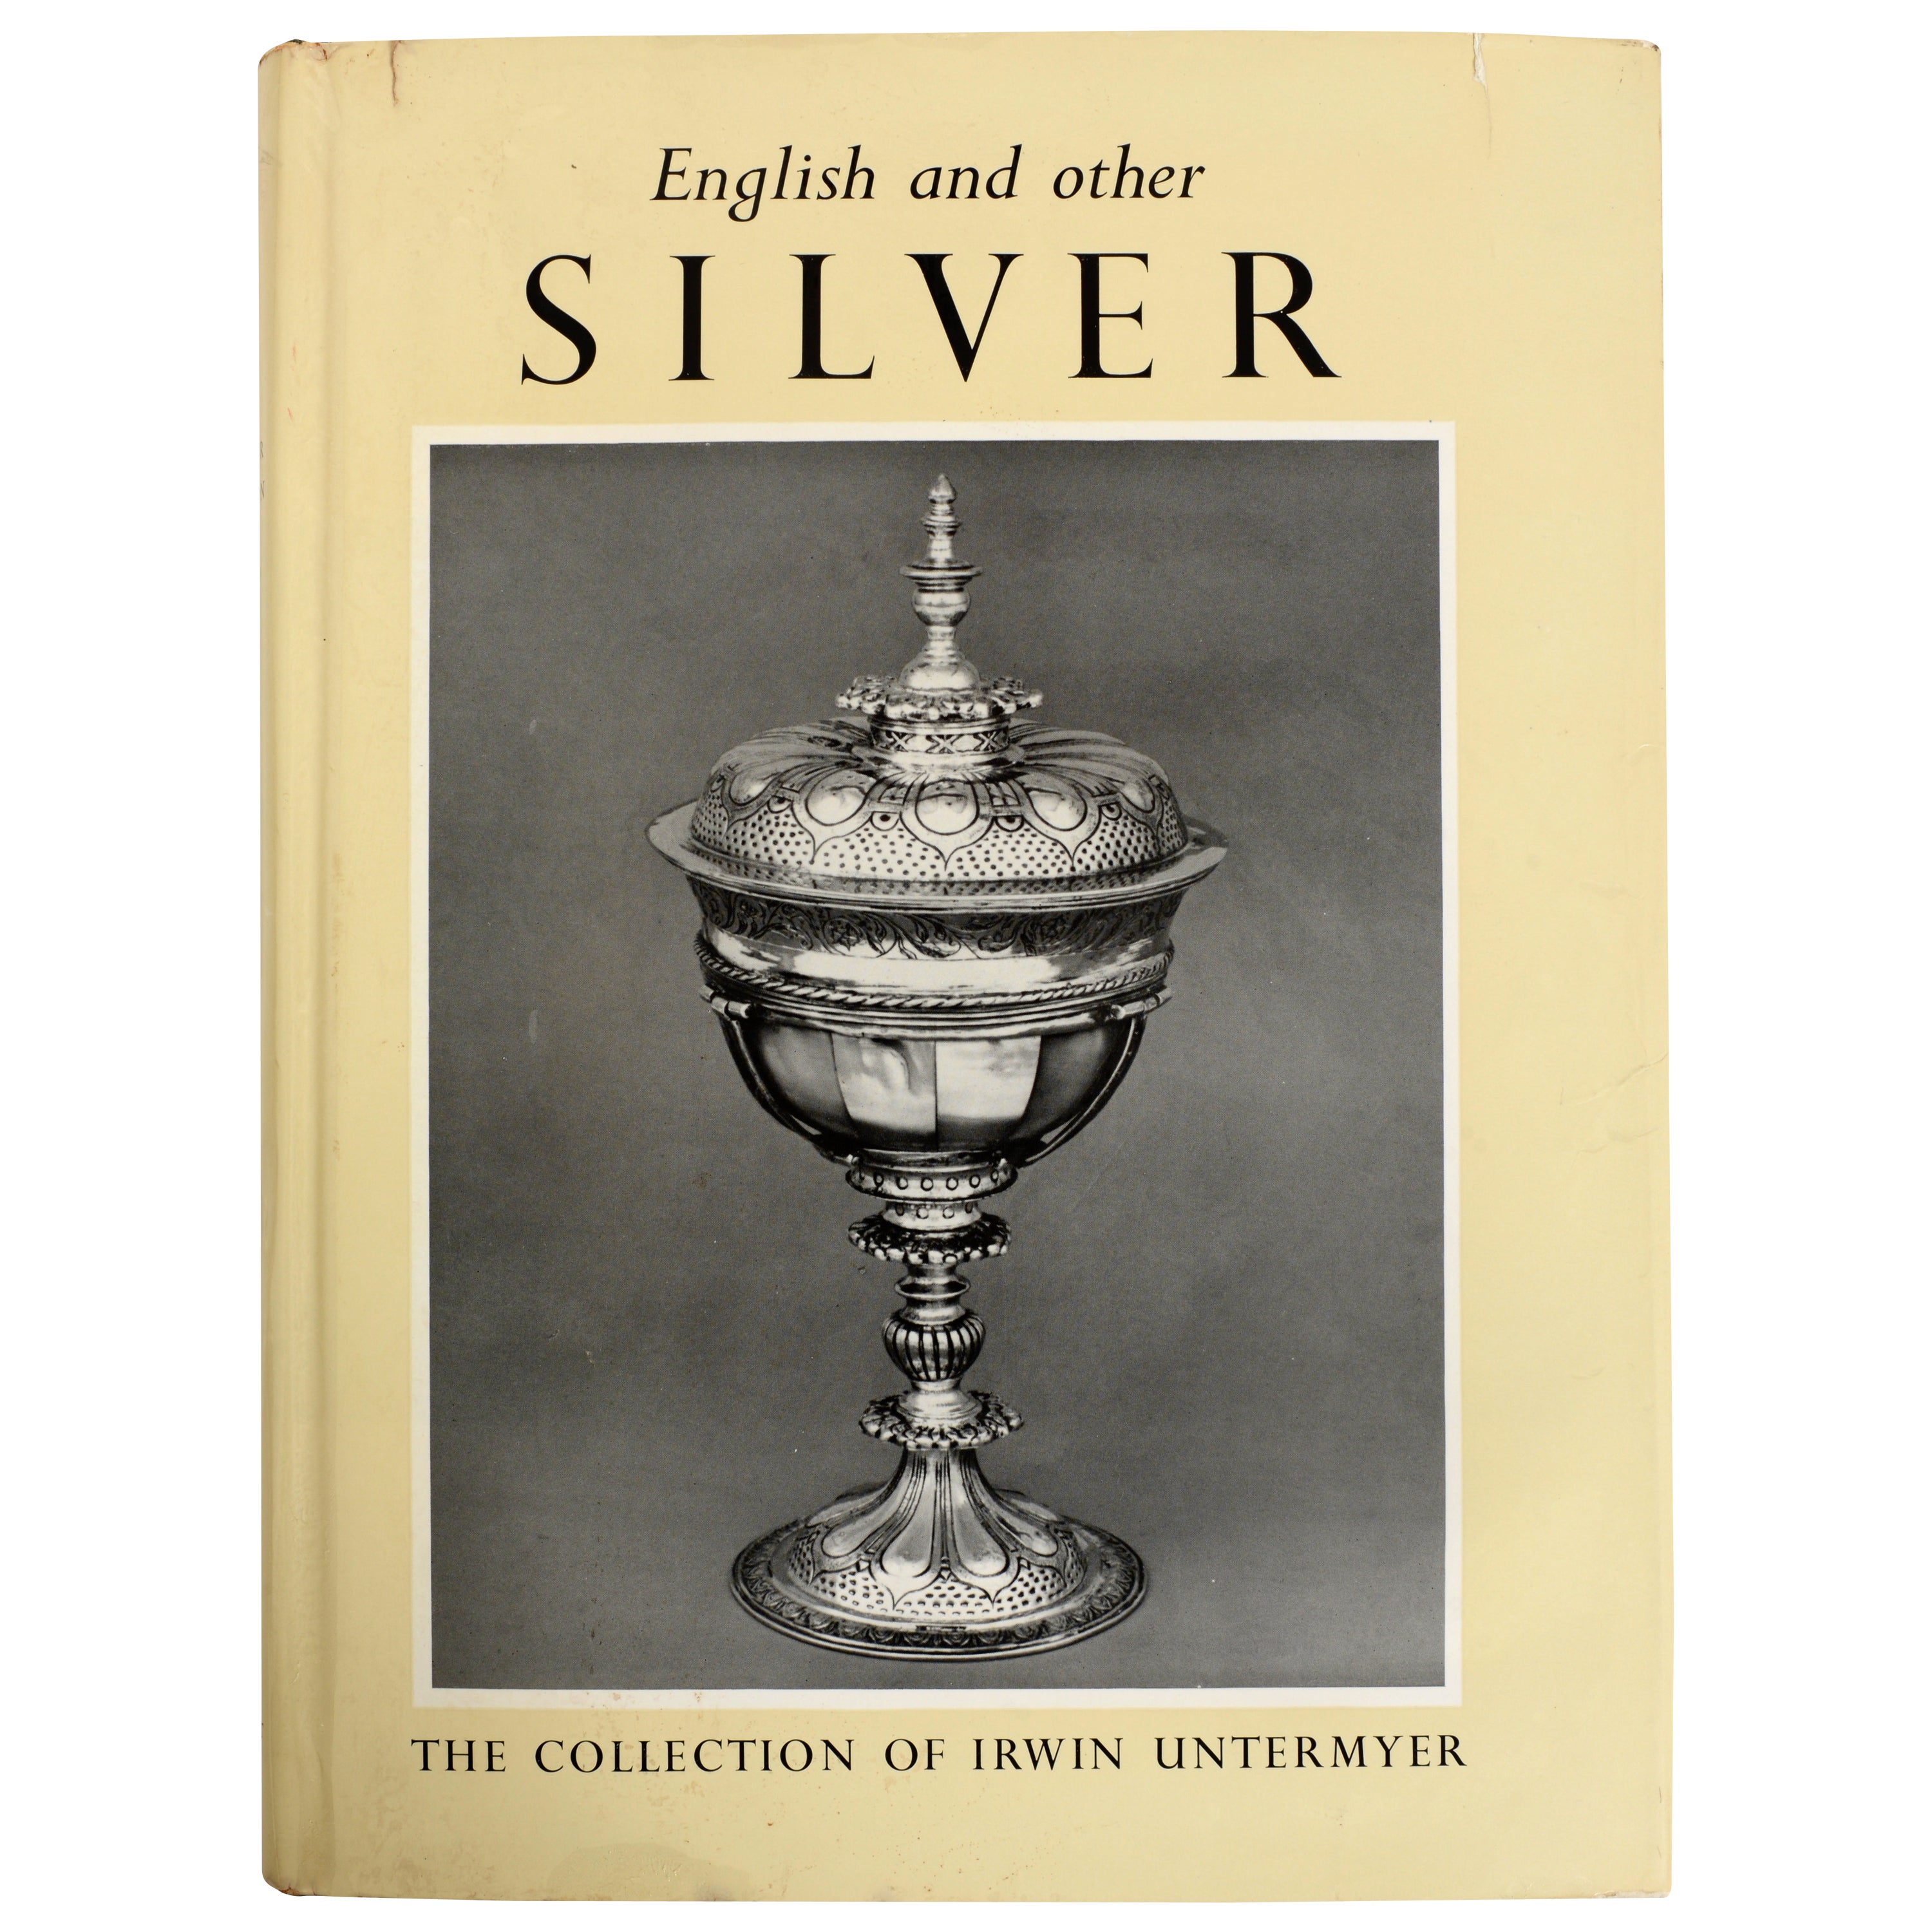 English & Other Silver in the Irwin Untermeyer Collection by Yvonne Hackenbroch For Sale